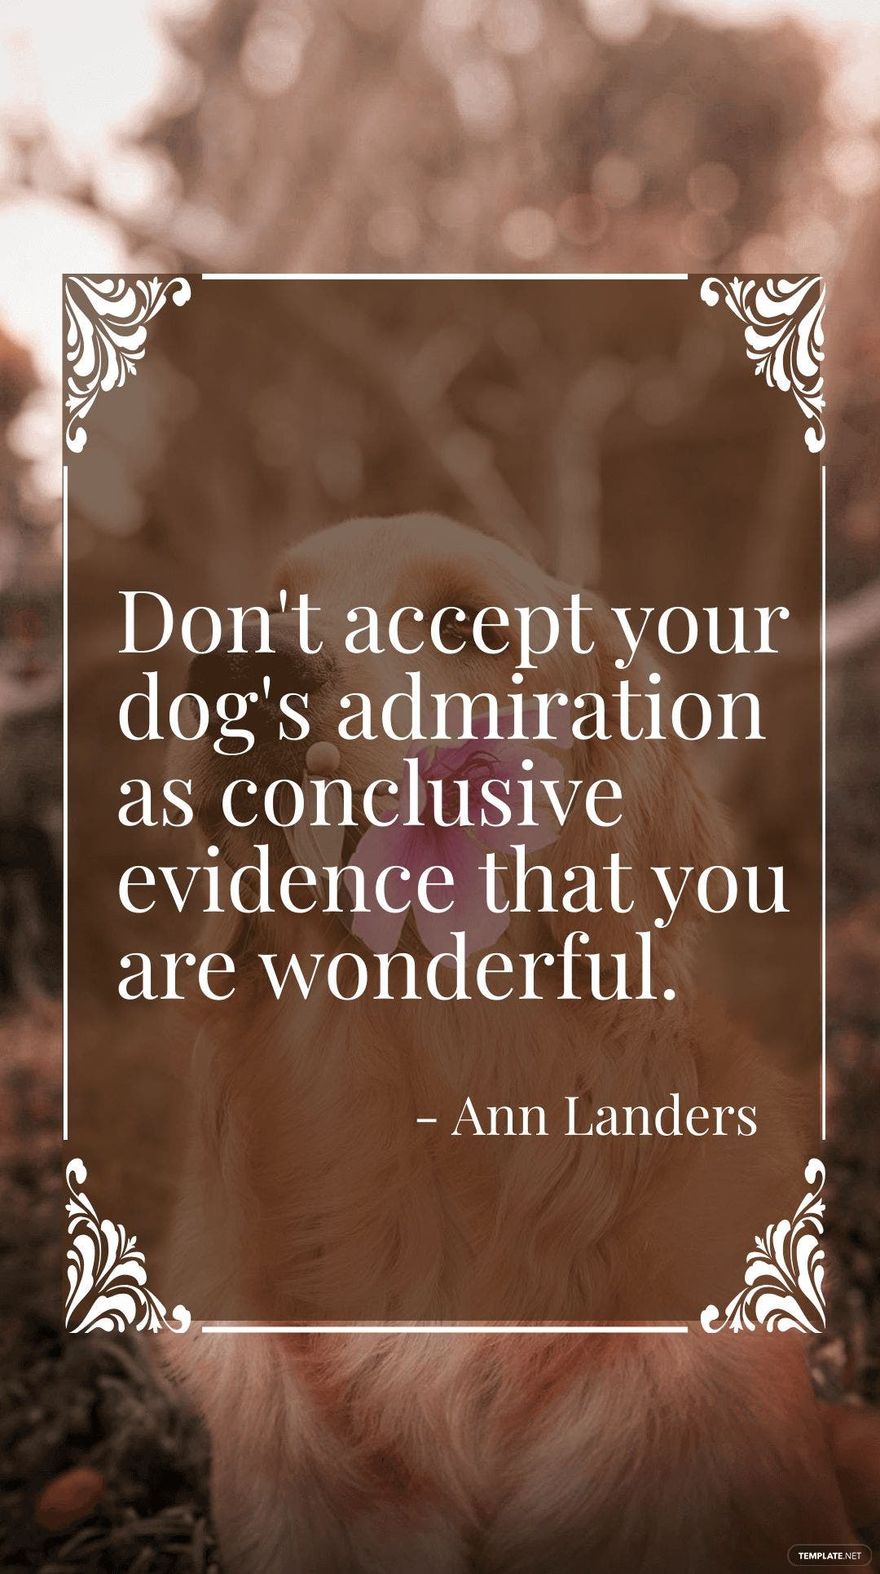 Free Ann Landers - Don't accept your dog's admiration as conclusive evidence that you are wonderful. in JPG